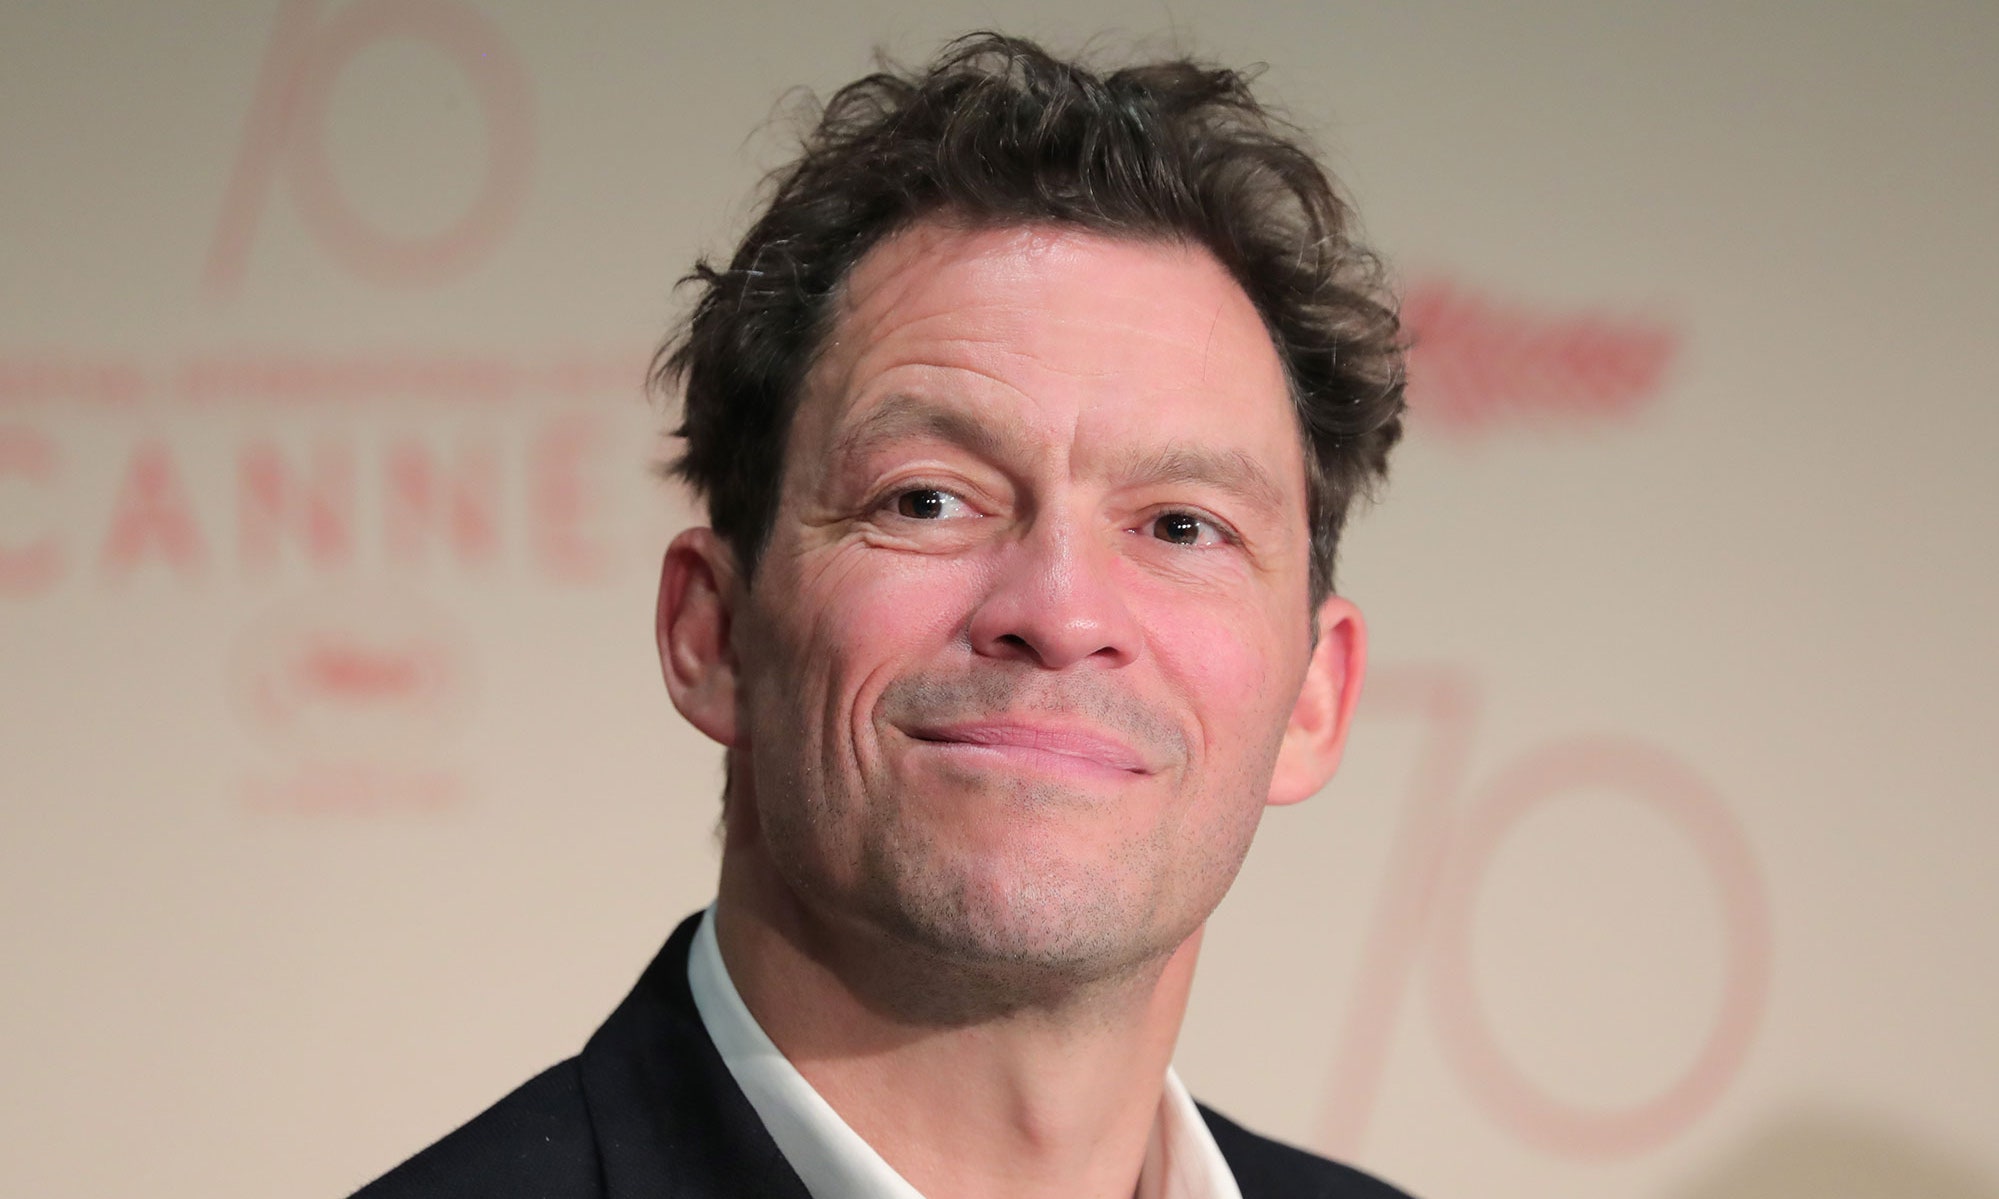 DominicWest